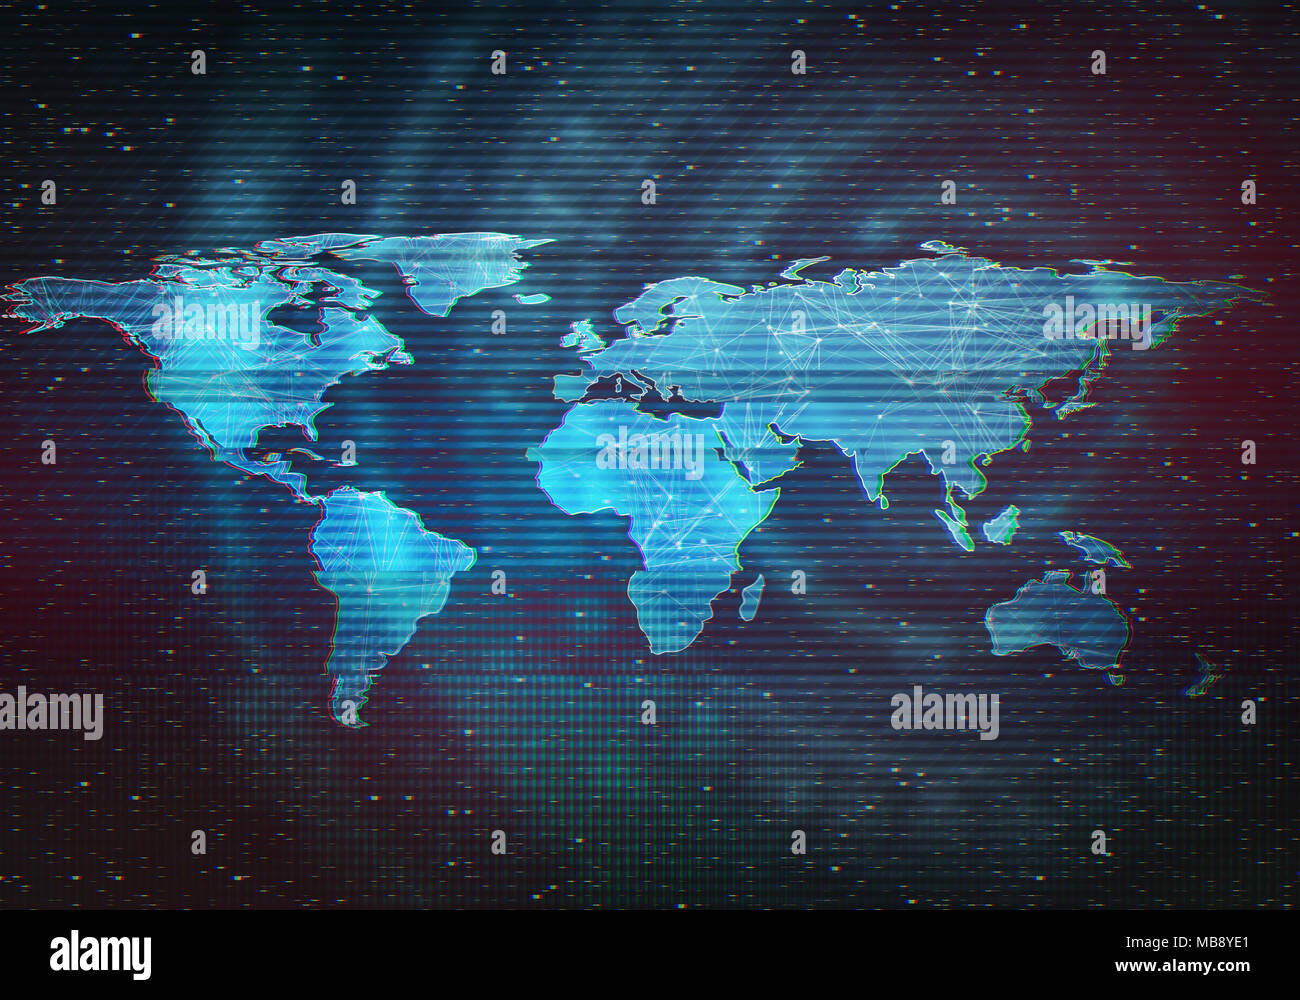 Abstract digital illustration of world map. Distorted interface screen, signal error, fail. Glitch effect technology background. Conceptual image. Stock Photo